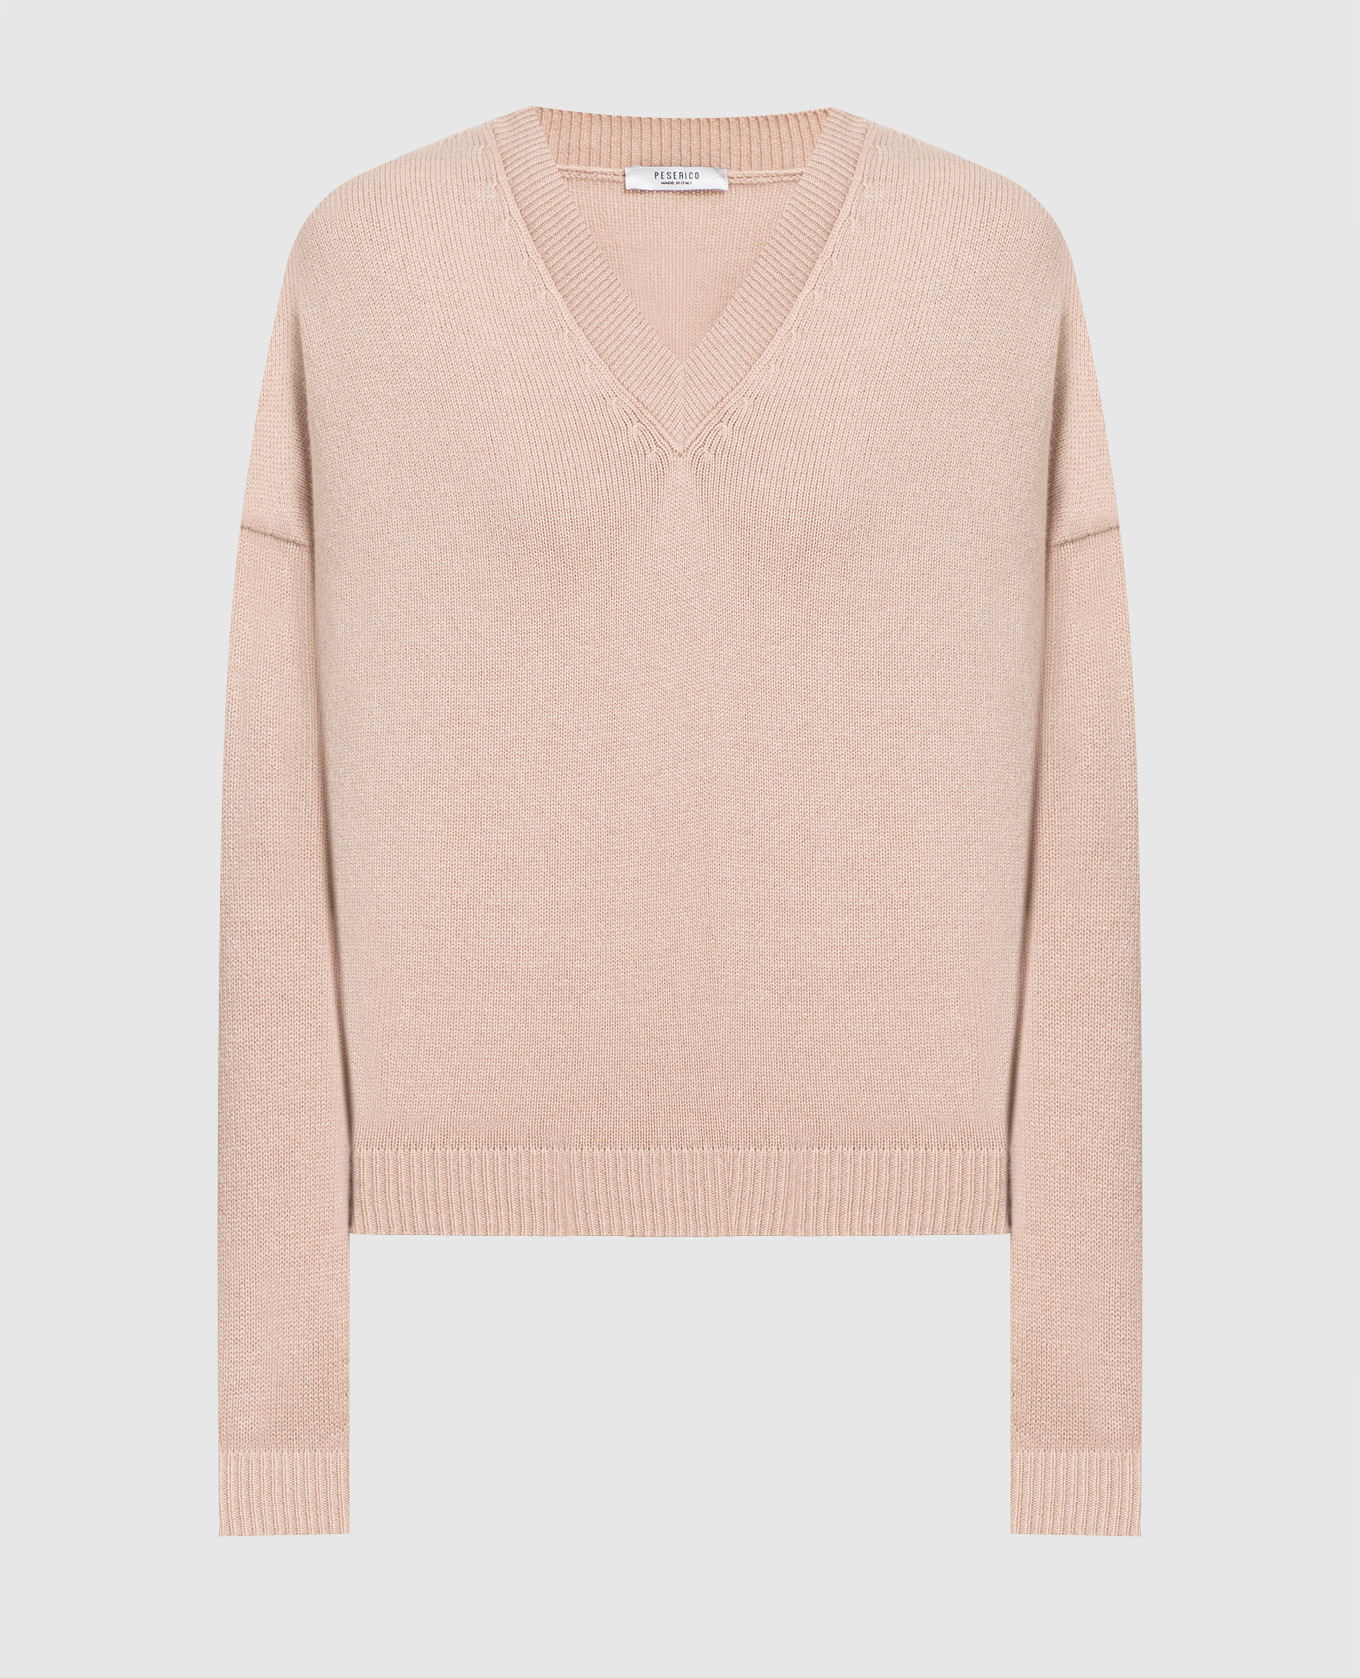 Beige wool, silk and cashmere pullover with monil chain